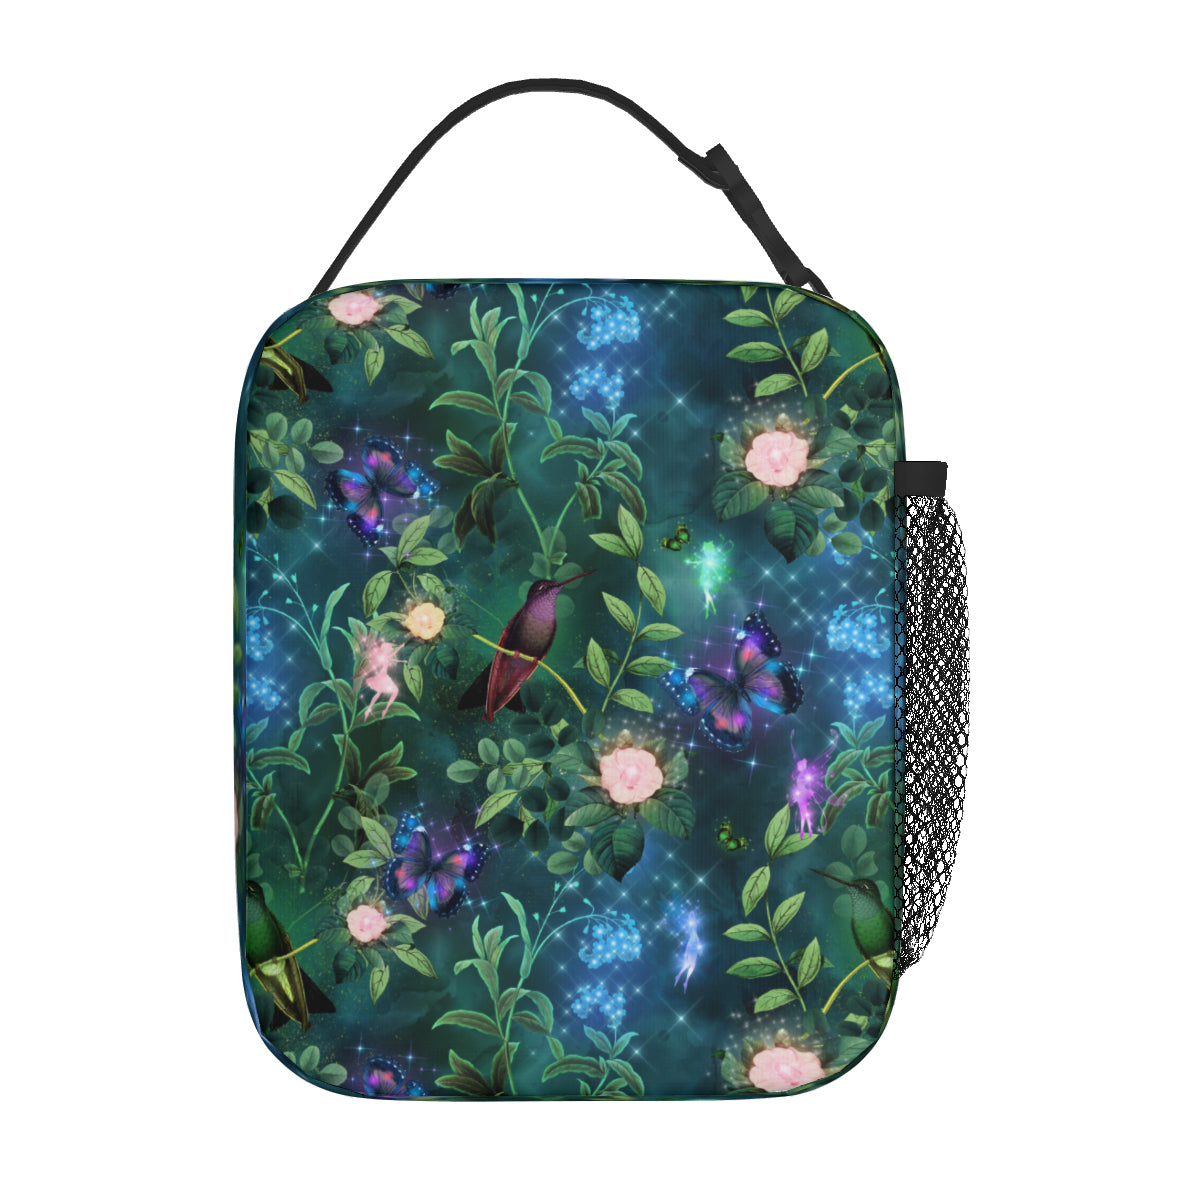 Enchanted Garden Insulated Lunch Bag